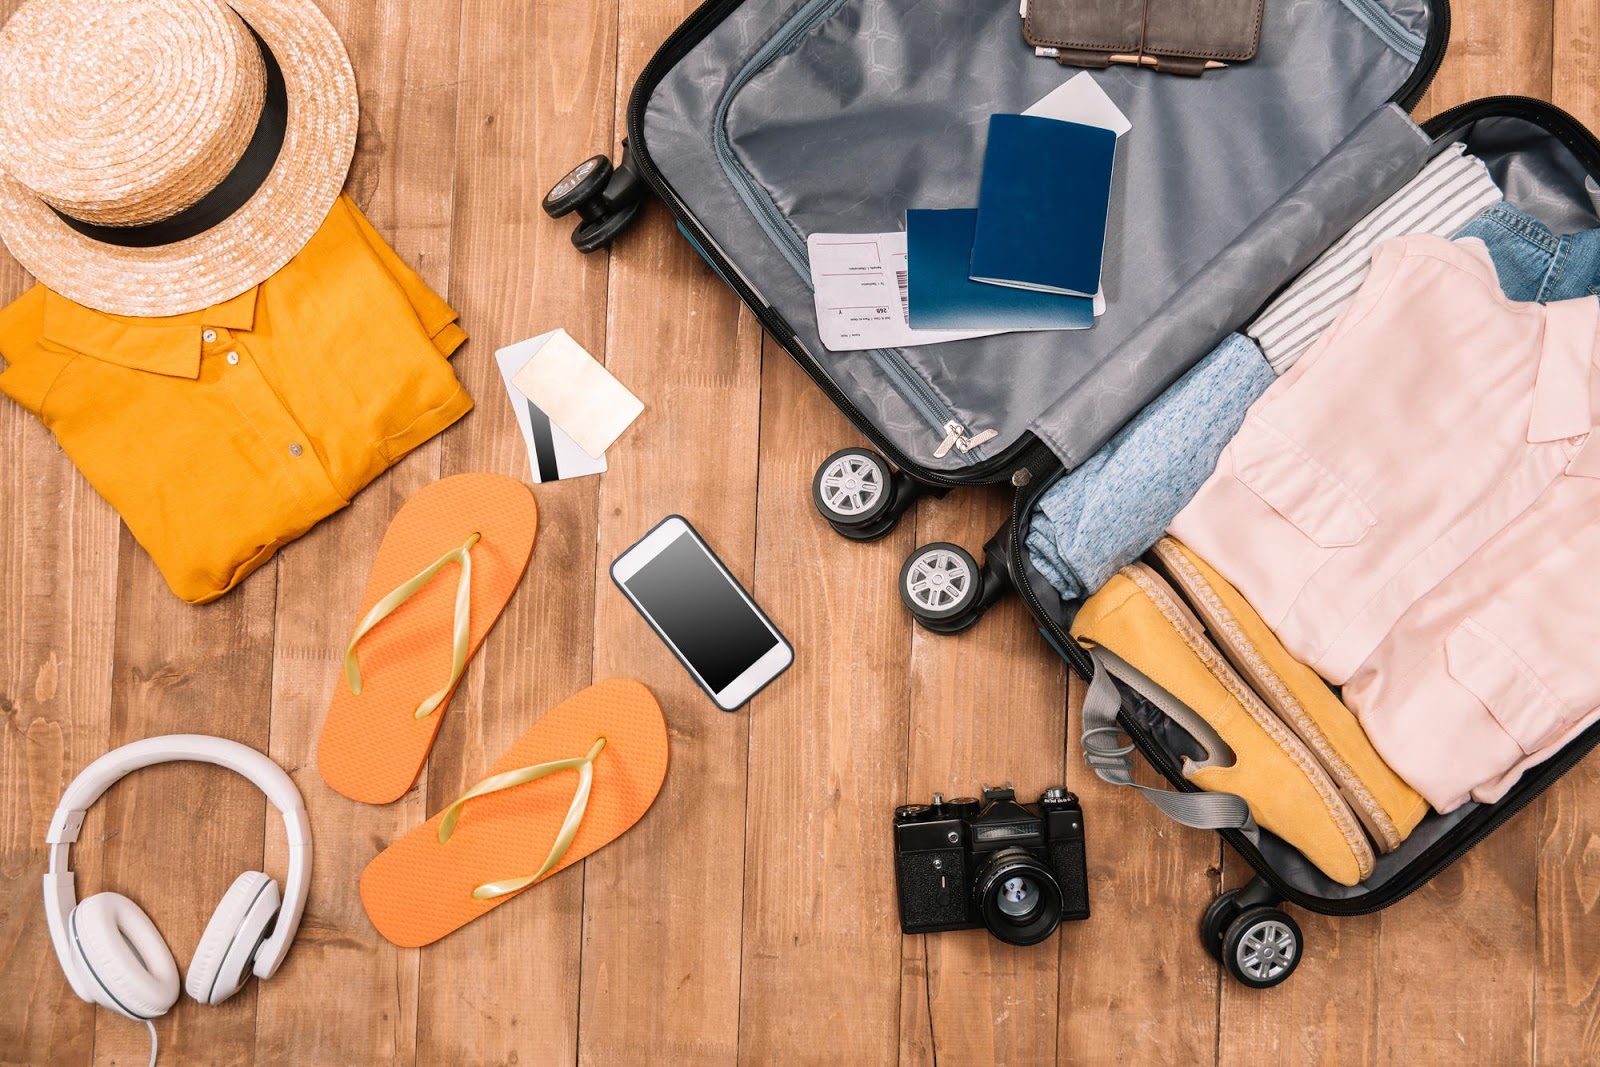 5 Amazing Travel Accessories That Make You a Smarter Reality Paper